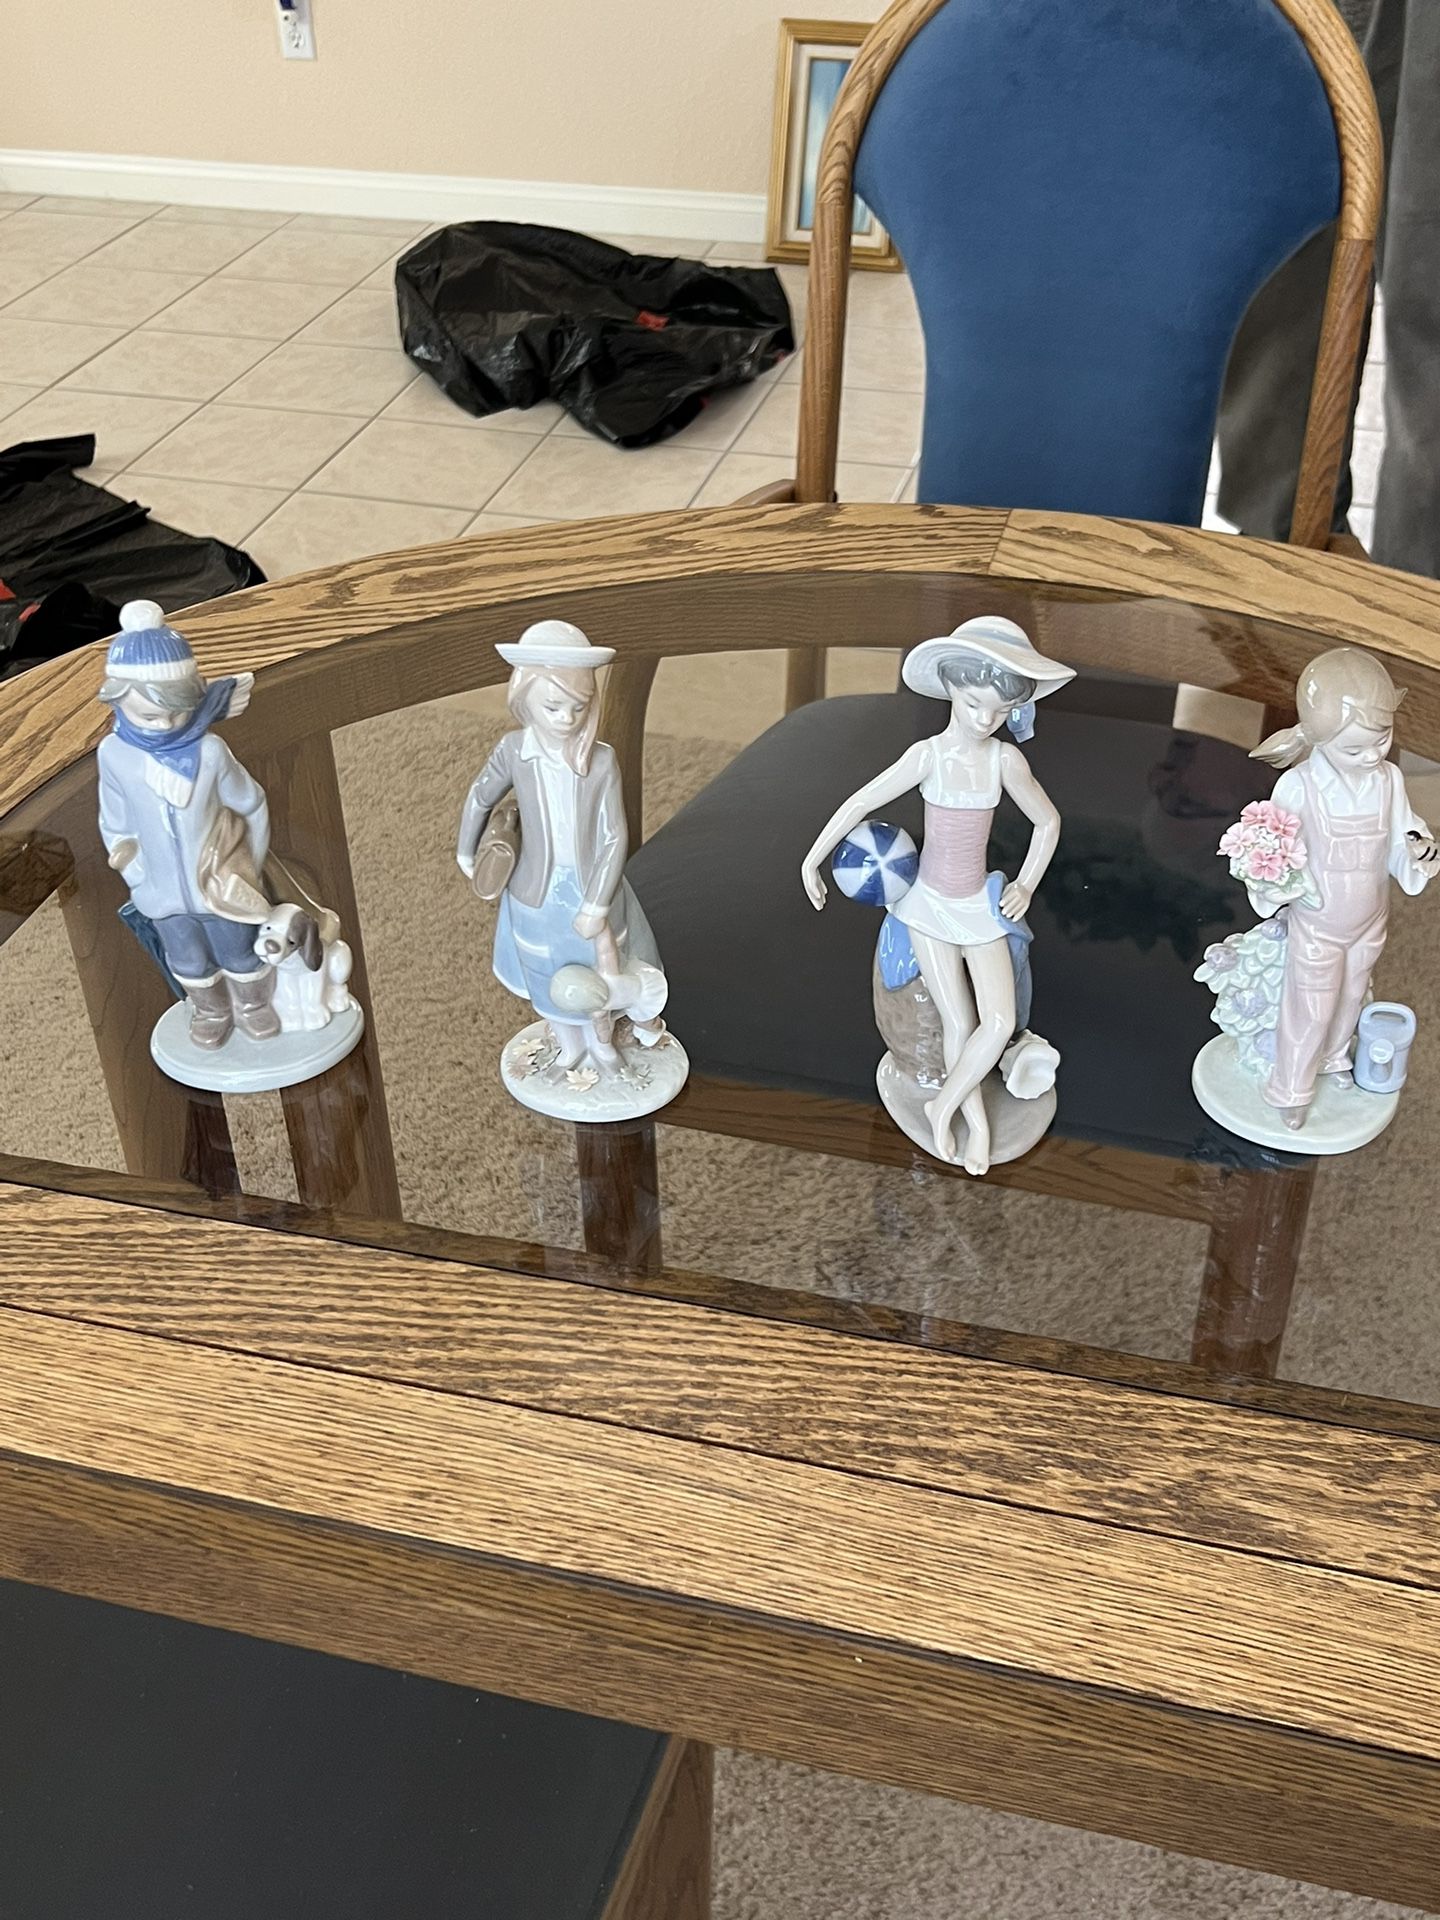 Rare, Beautiful Lladro 1983 Seasons Figurines (Discontinued Series) with Original Boxes (includes All 4)